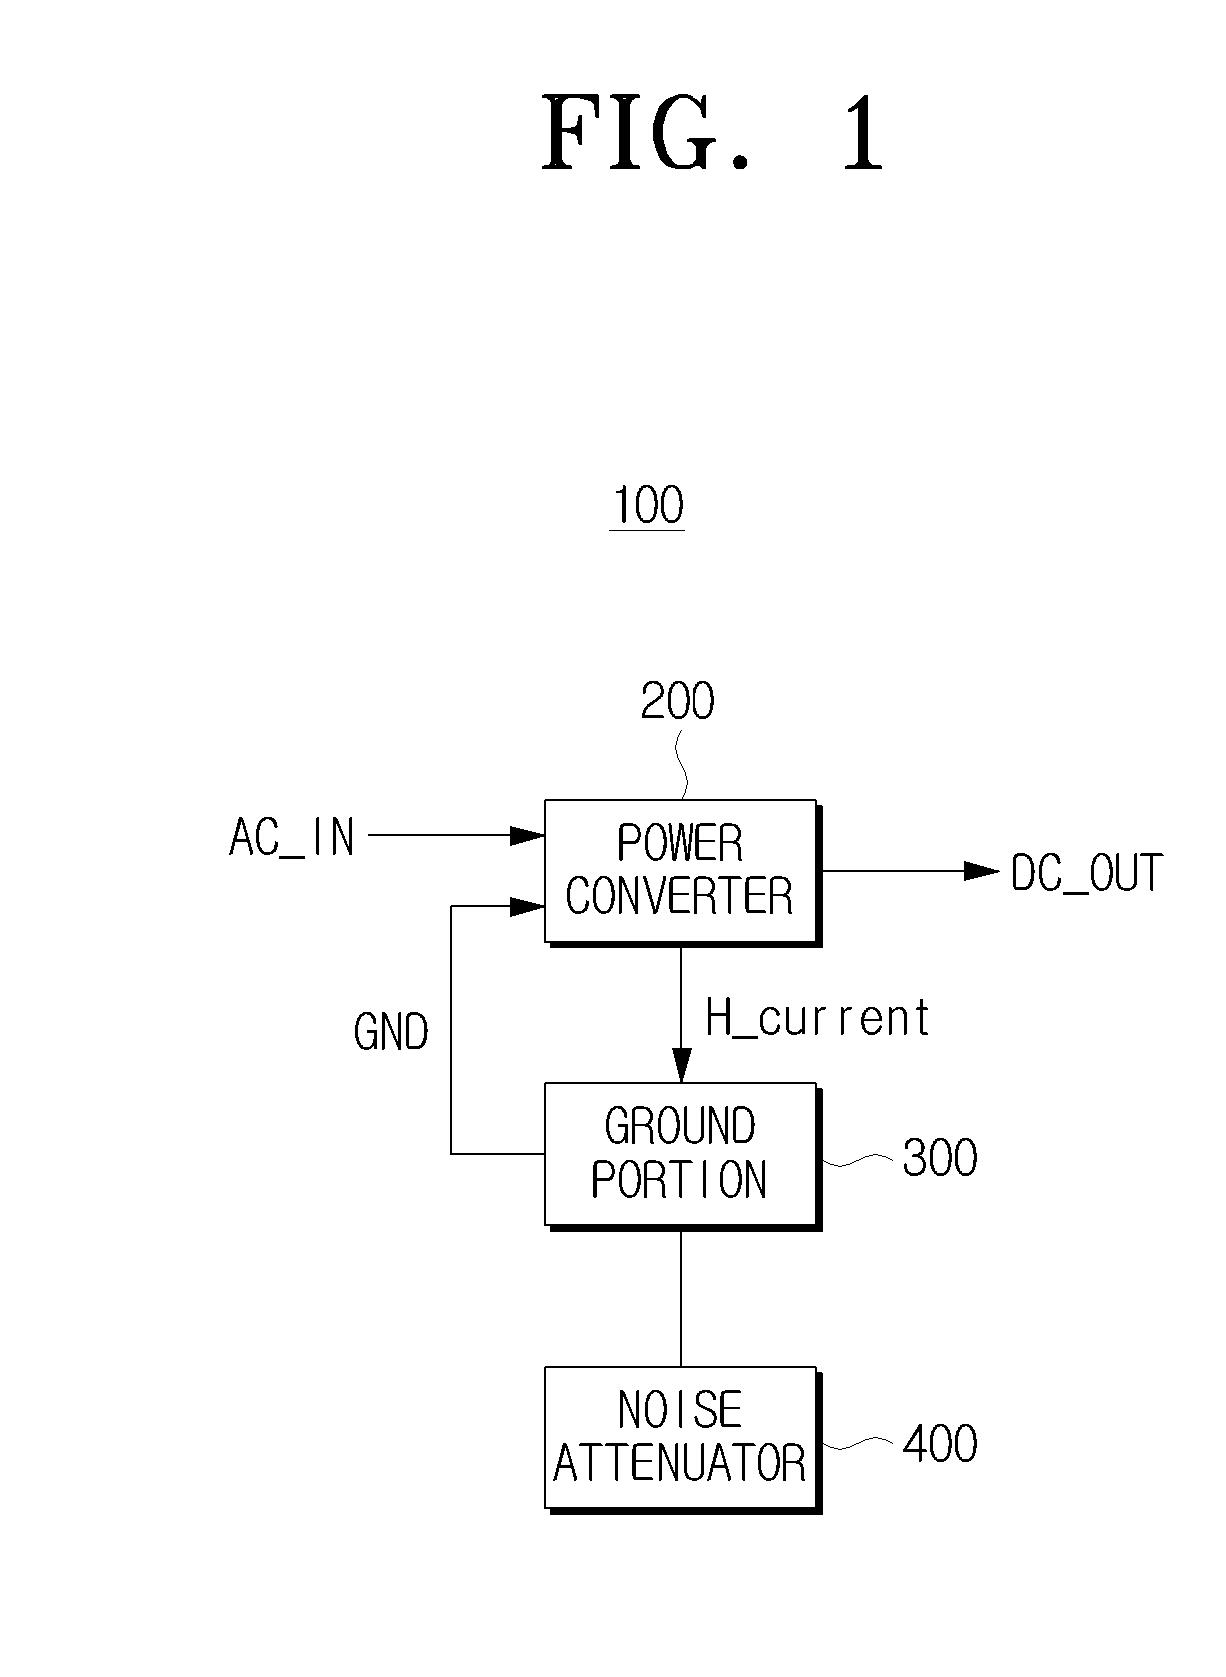 Power supply apparatus for attenuating noise